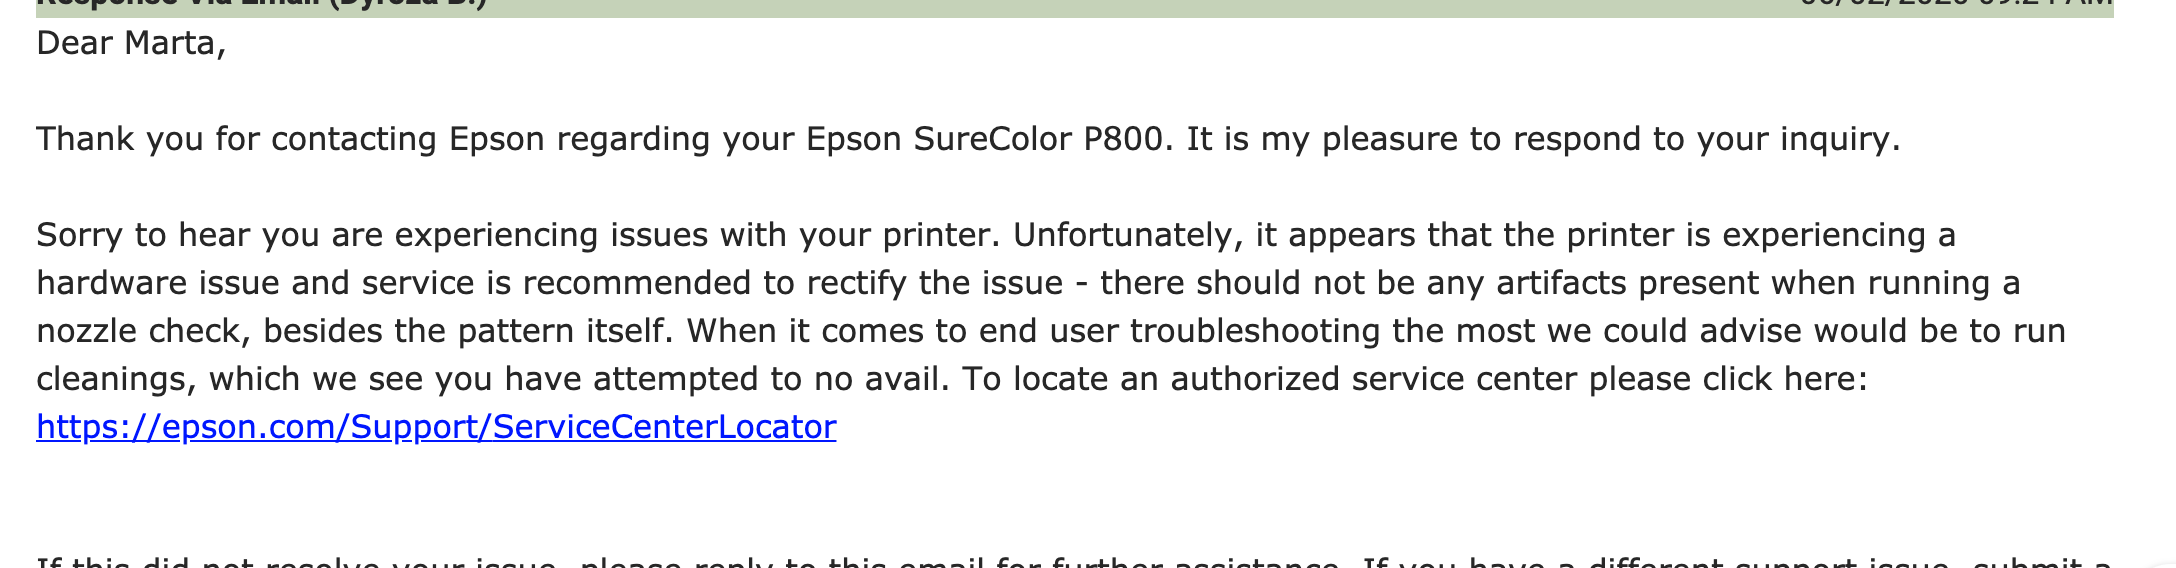 Epson Technical Support Response